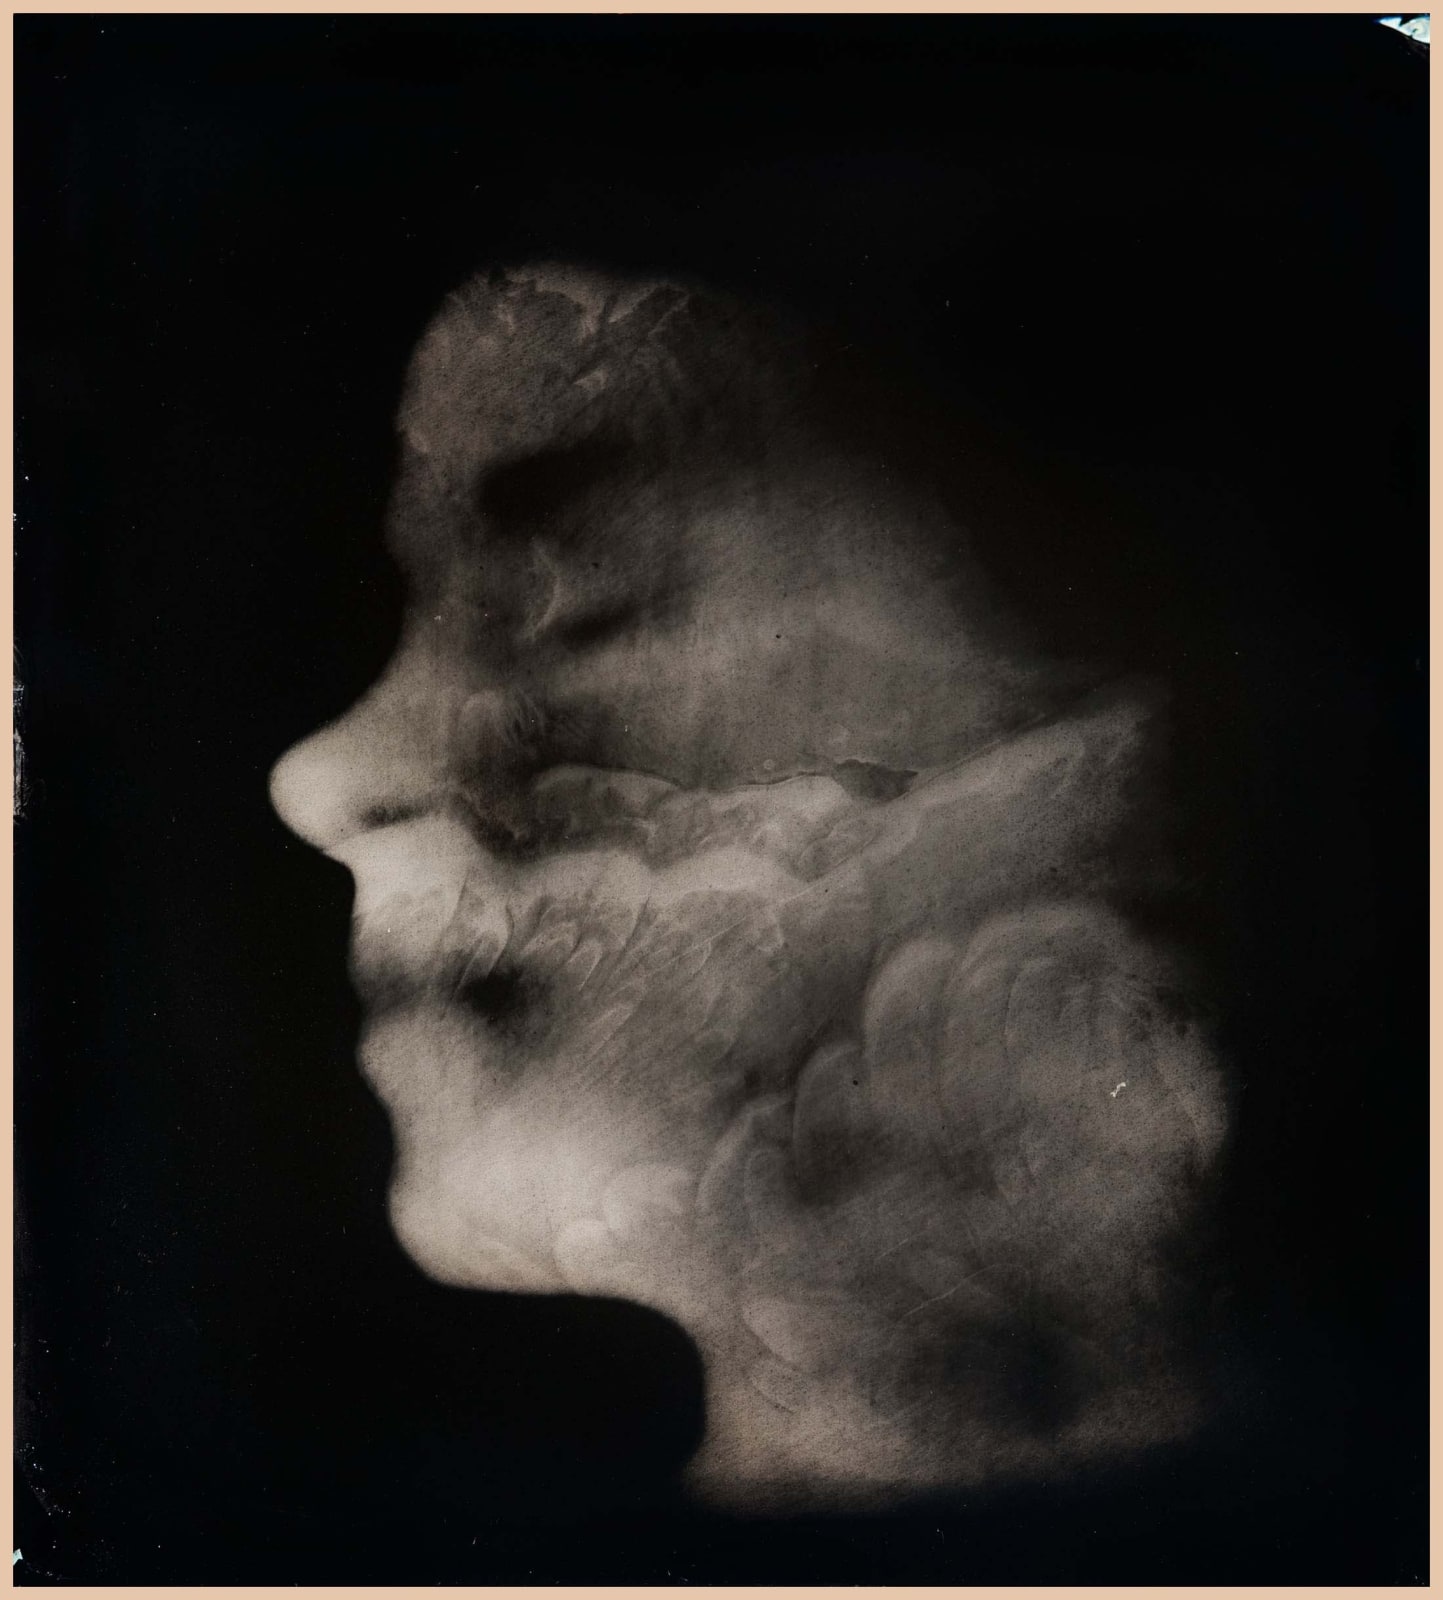 Sally Mann self-portrait ambrotype from the Upon Reflection series